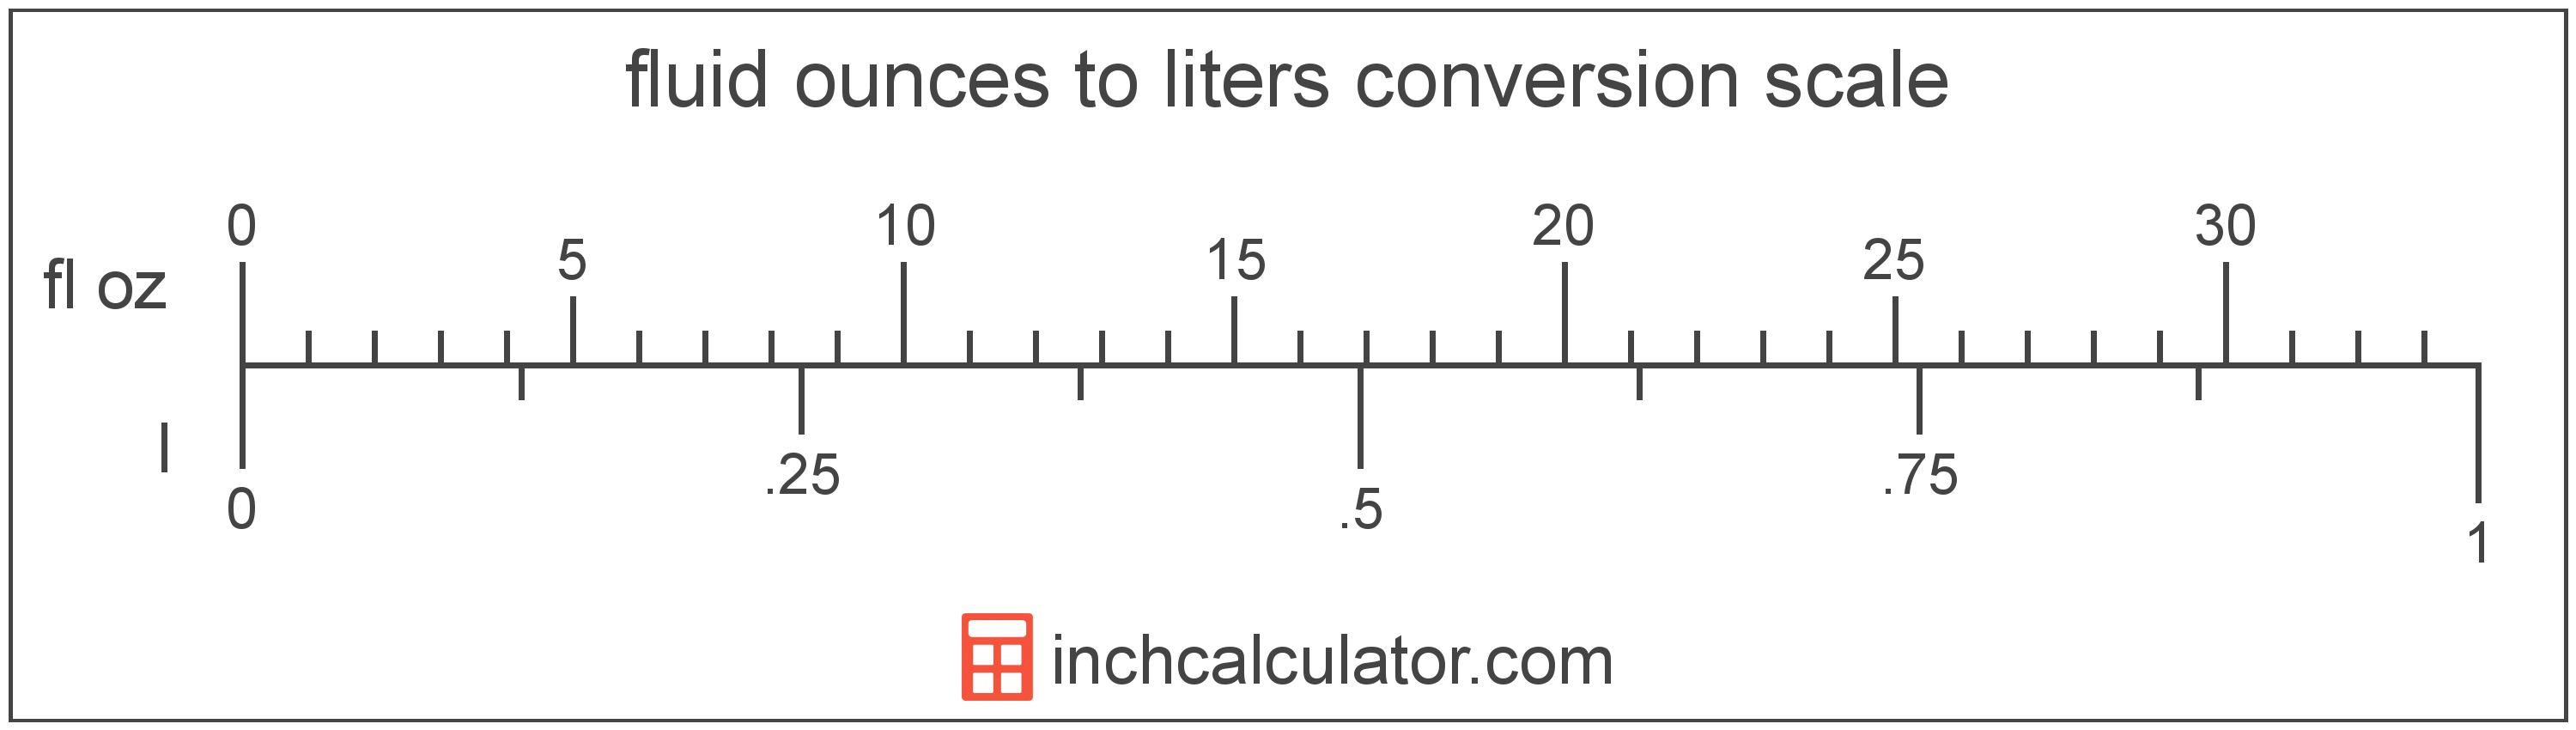 Ounces To Liters Conversion Chart